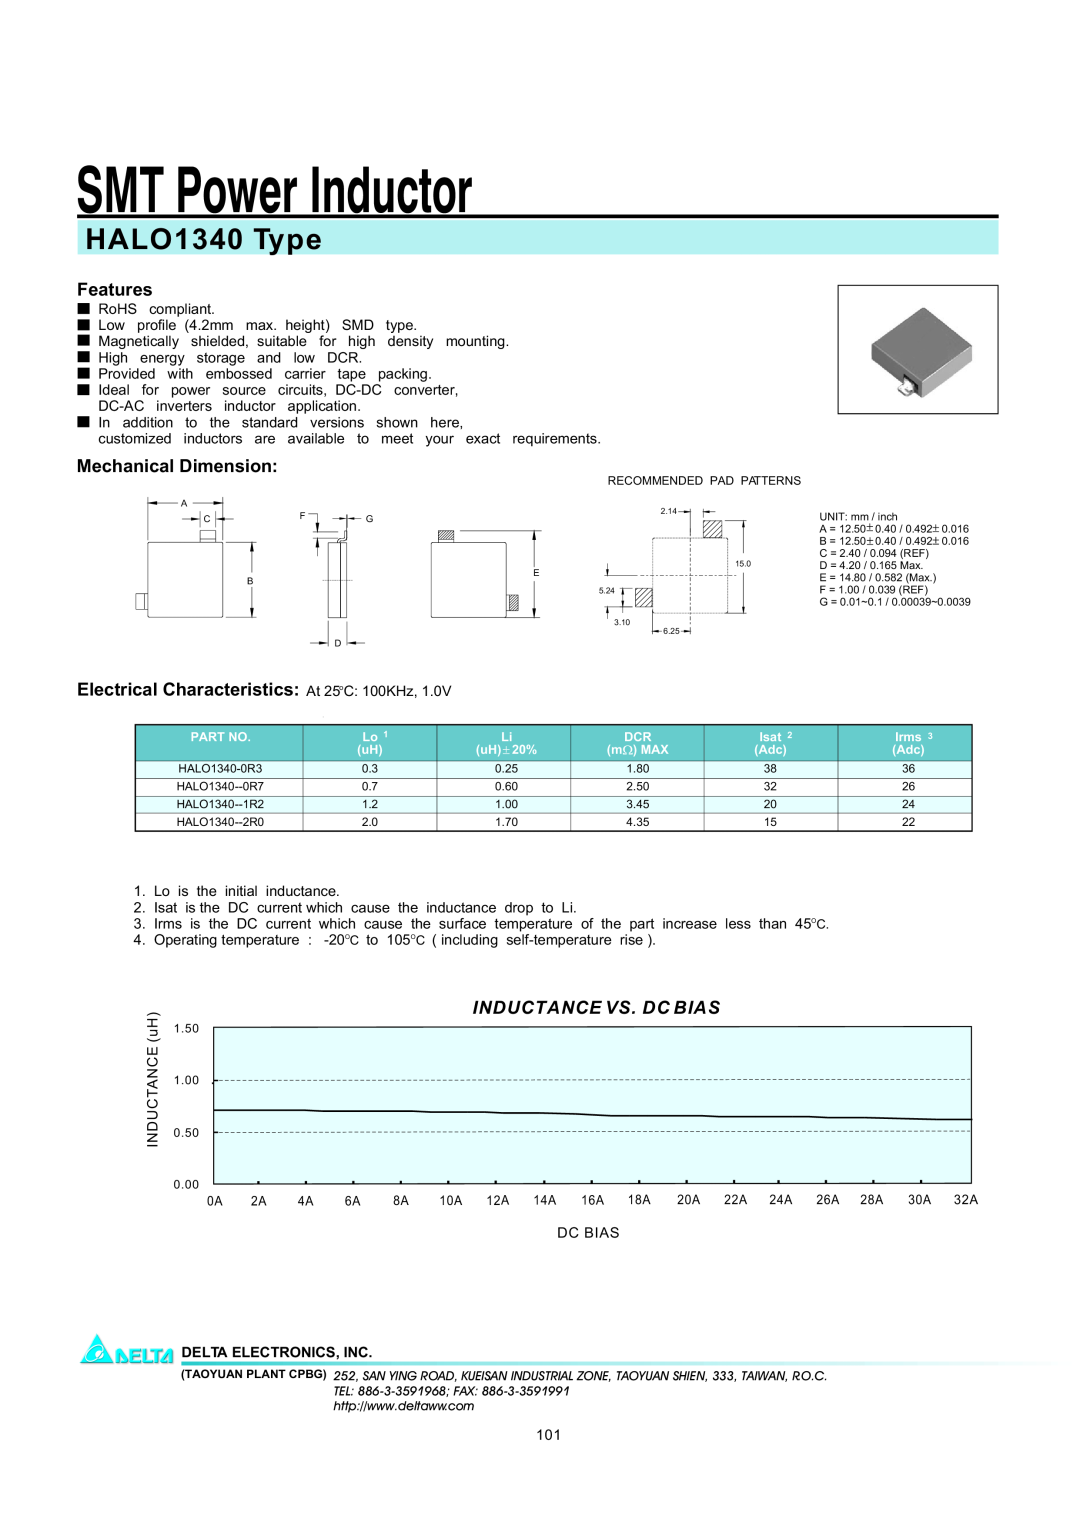 Delta Electronics manual SMT Power Inductor, HALO1340 Type, Features, Mechanical Dimension, Inductance Vs. Dc Bias 